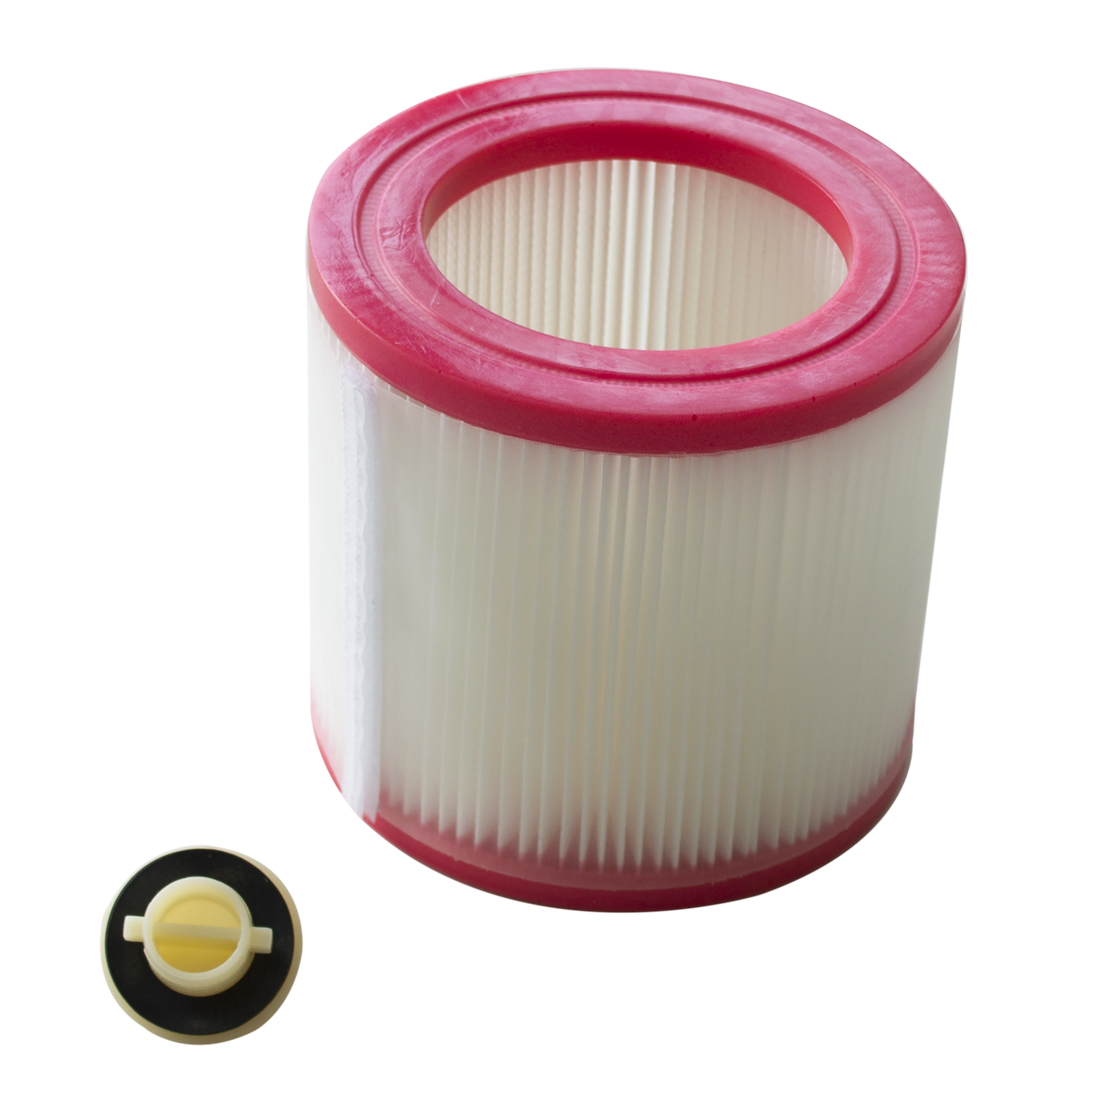 Vacuum Cleaner Spare Parts Accessories of 6253E-10 95-20 95-30 62139-35 Washable Hepa Filter Canister Selective Color